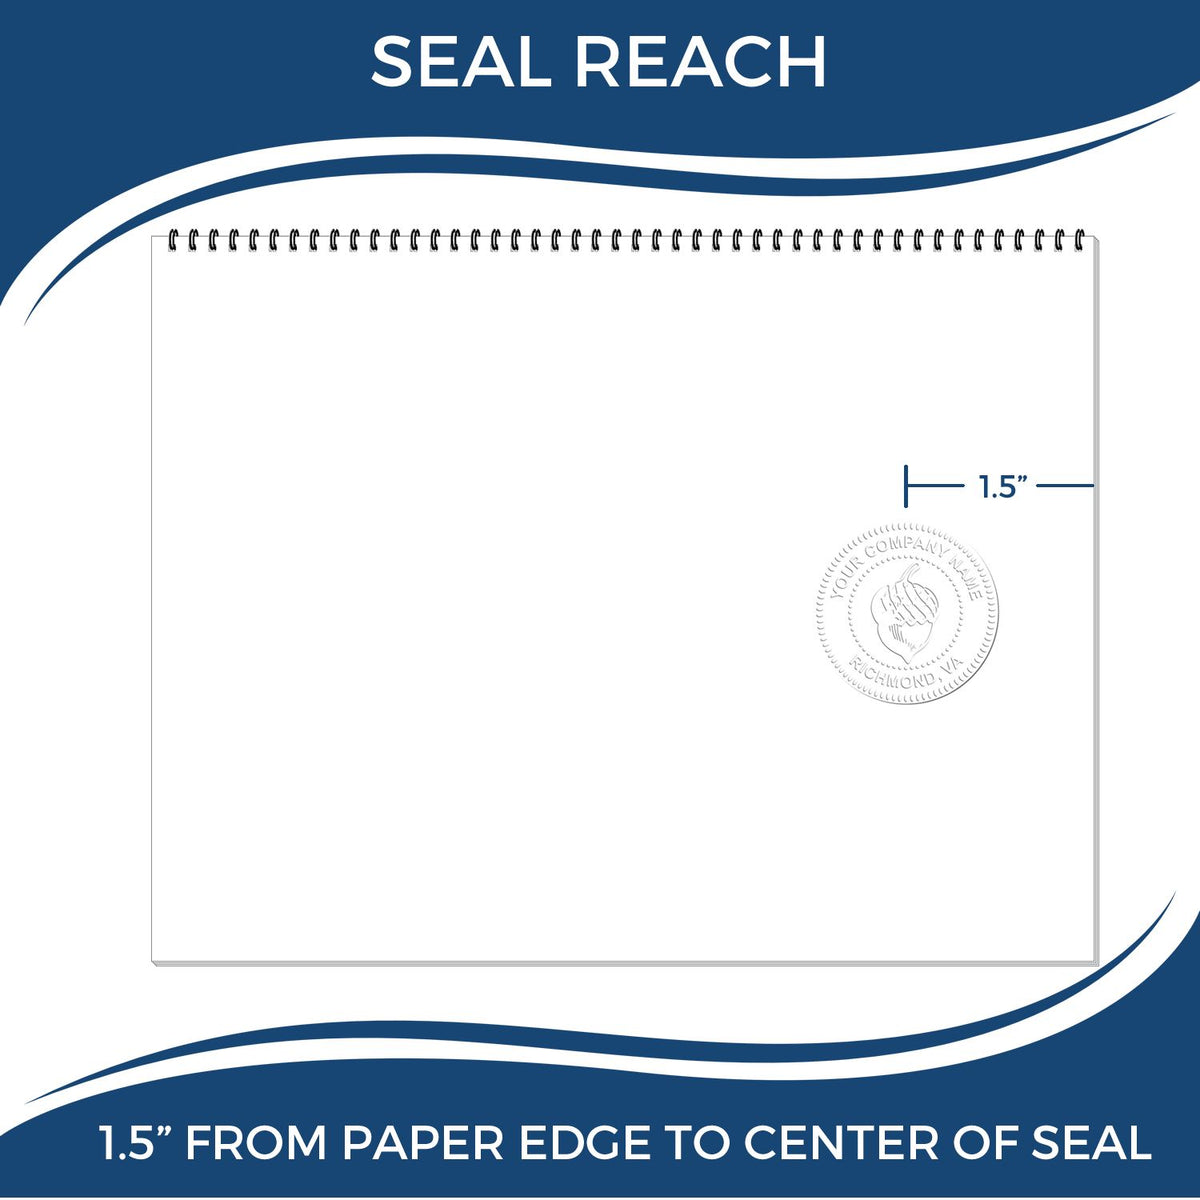 An infographic showing the seal reach which is represented by a ruler and a miniature seal image of the Handheld Missouri Land Surveyor Seal